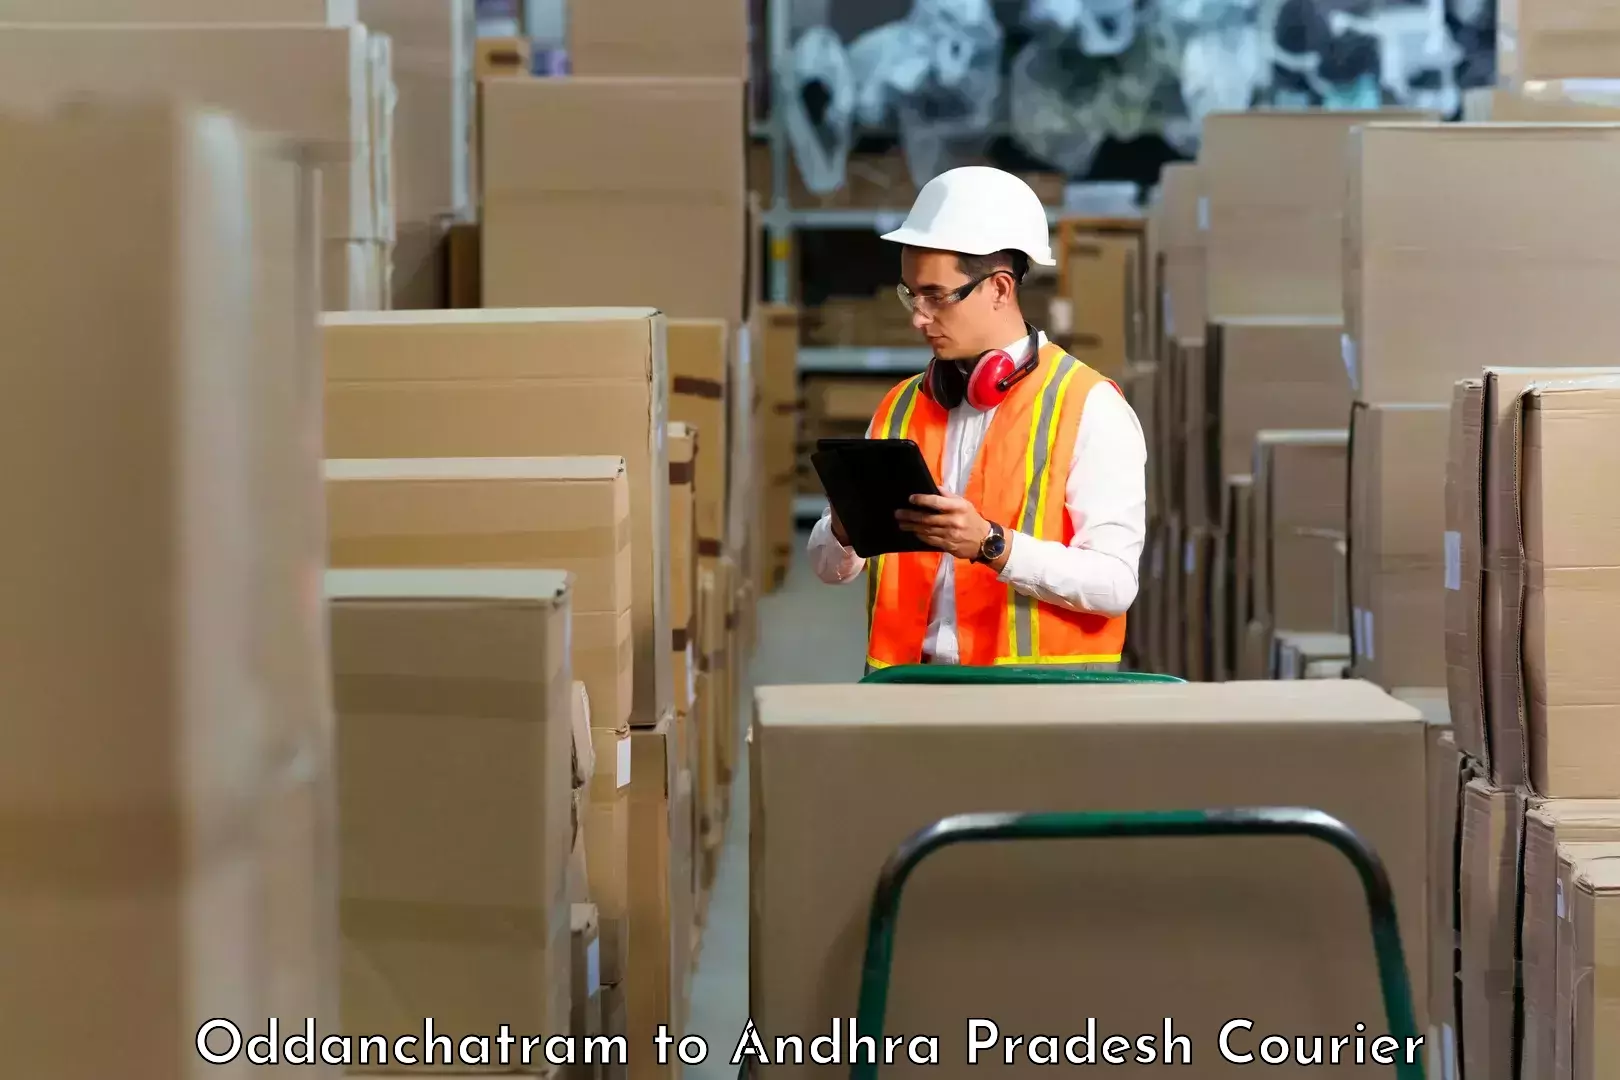 Same-day delivery solutions Oddanchatram to Bhimadole